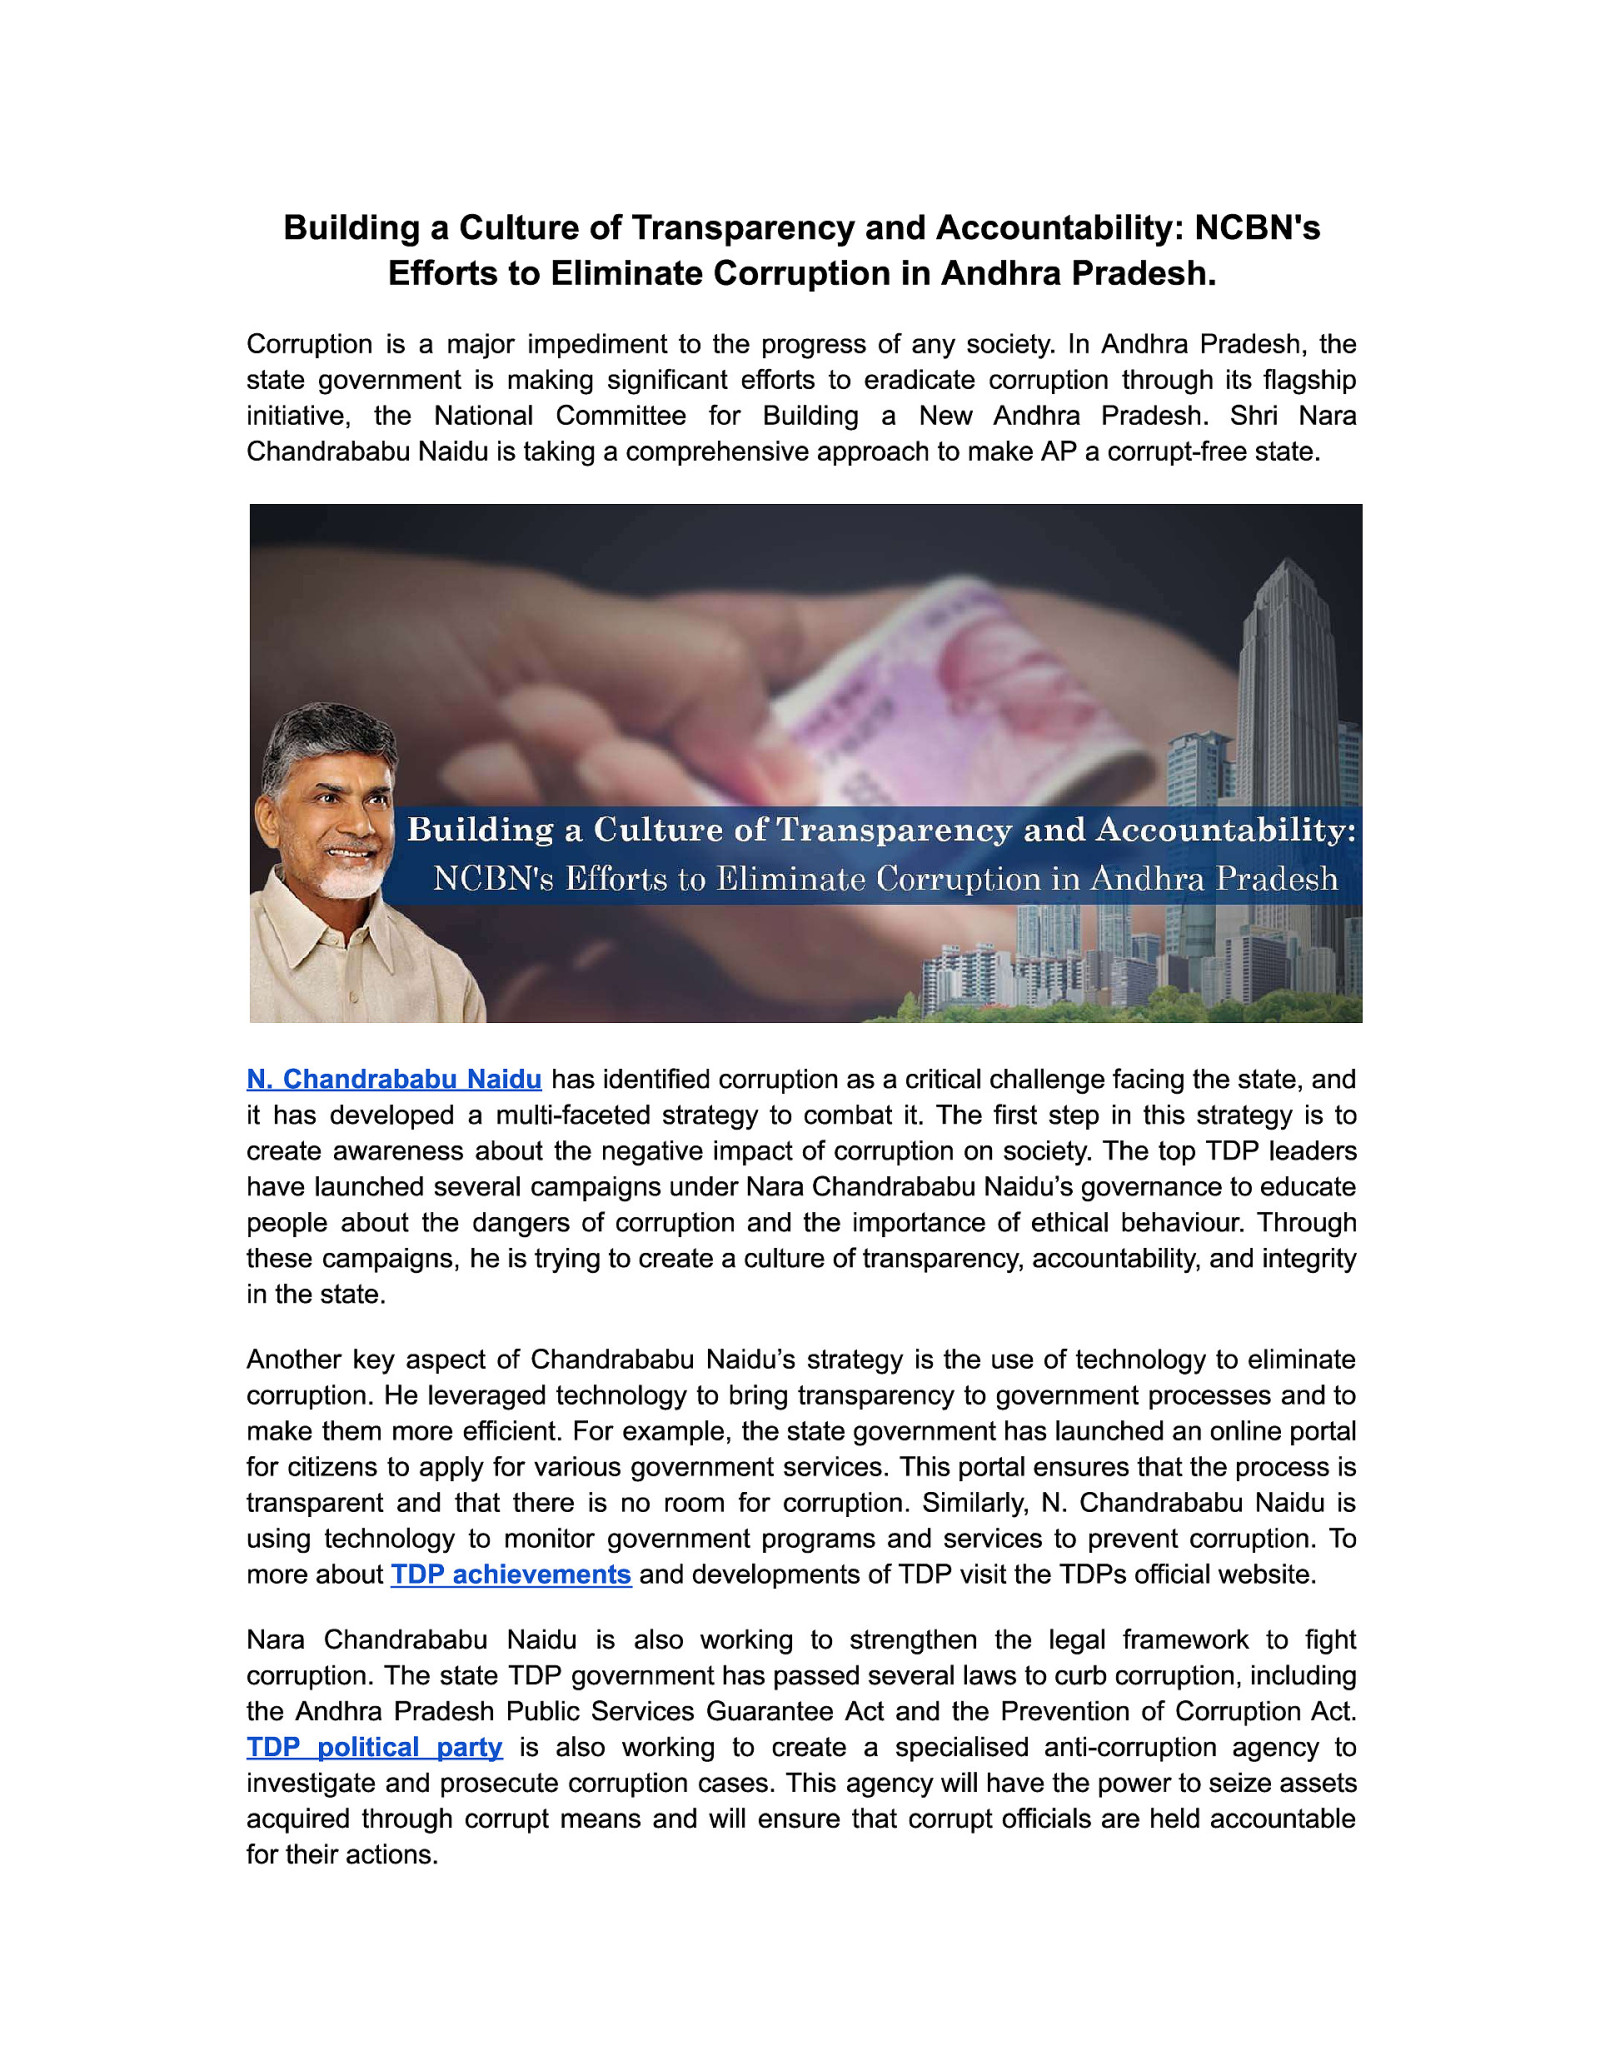 Building a Culture of Transparency and Accountability: NCBN’s Efforts to Eliminate Corruption in Andhra Pradesh